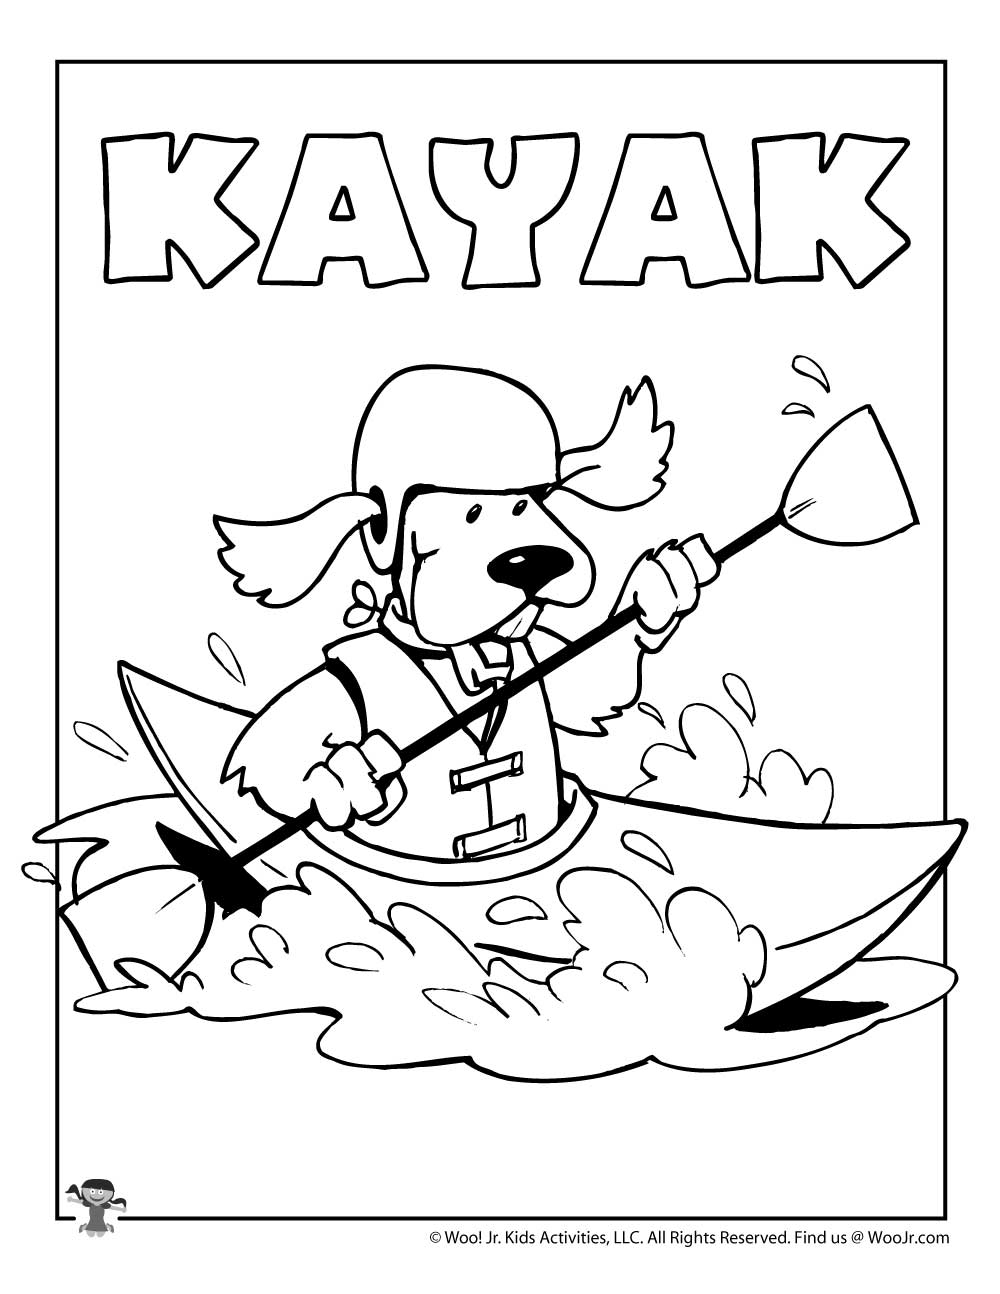 K is for Kayak Coloring Page | Woo! Jr. Kids Activities : Children's  Publishing